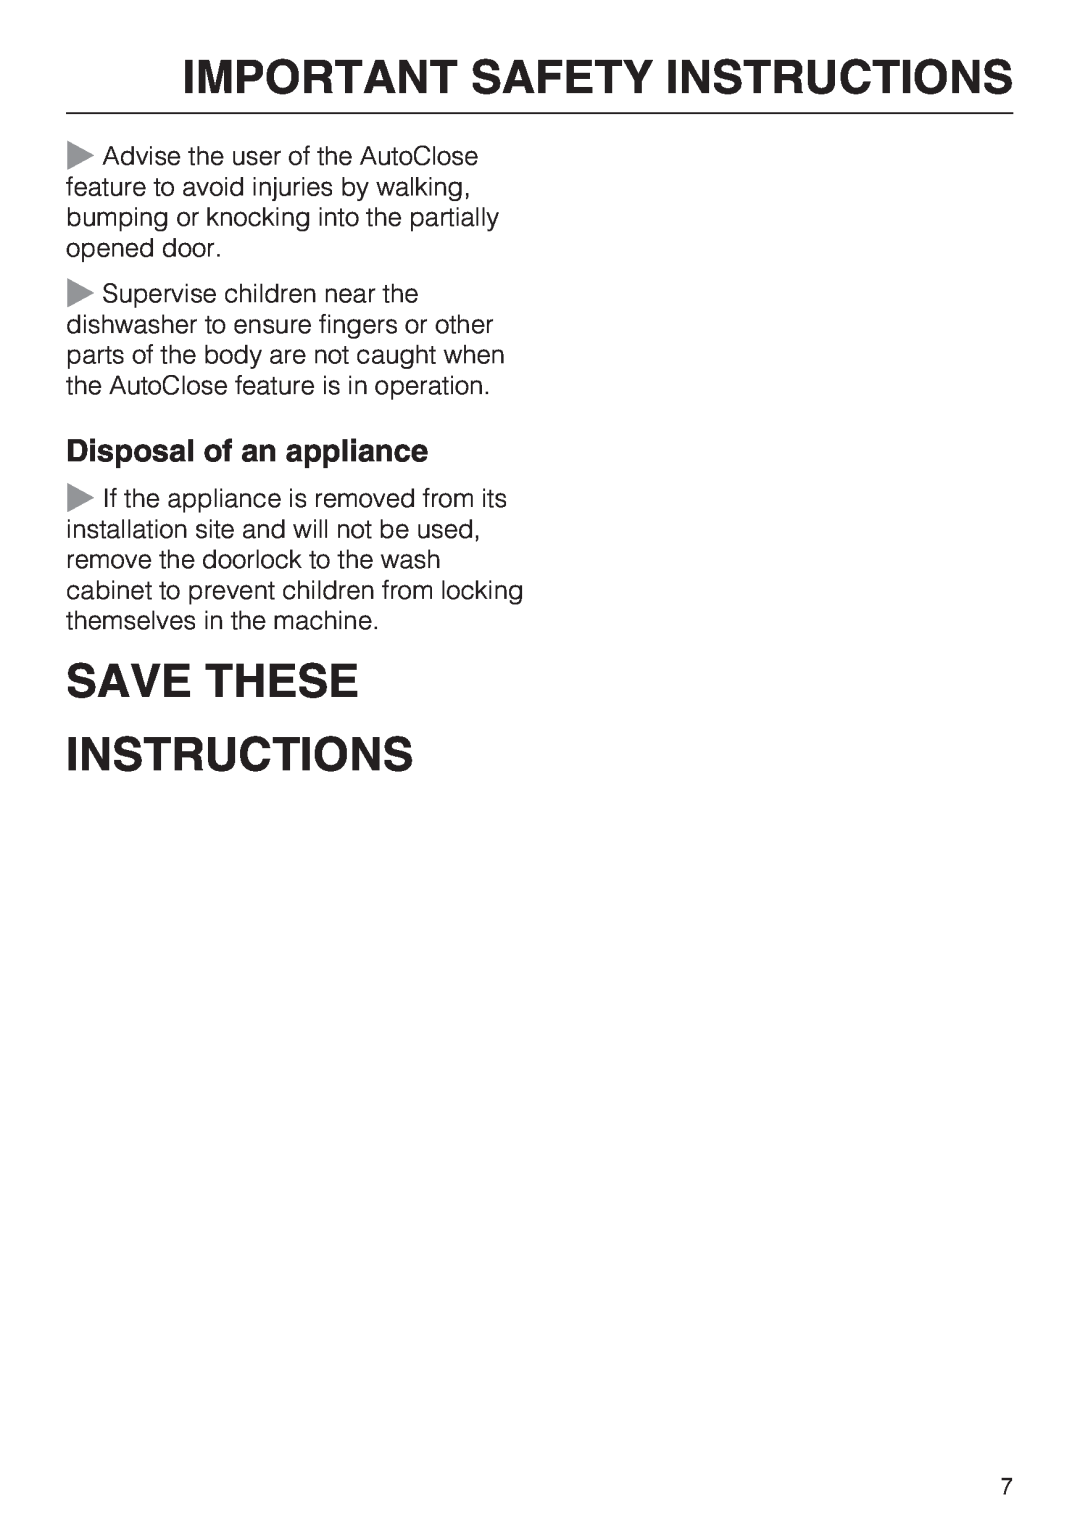 Miele G 2872 operating instructions Save These Instructions, Disposal of an appliance, Important Safety Instructions 